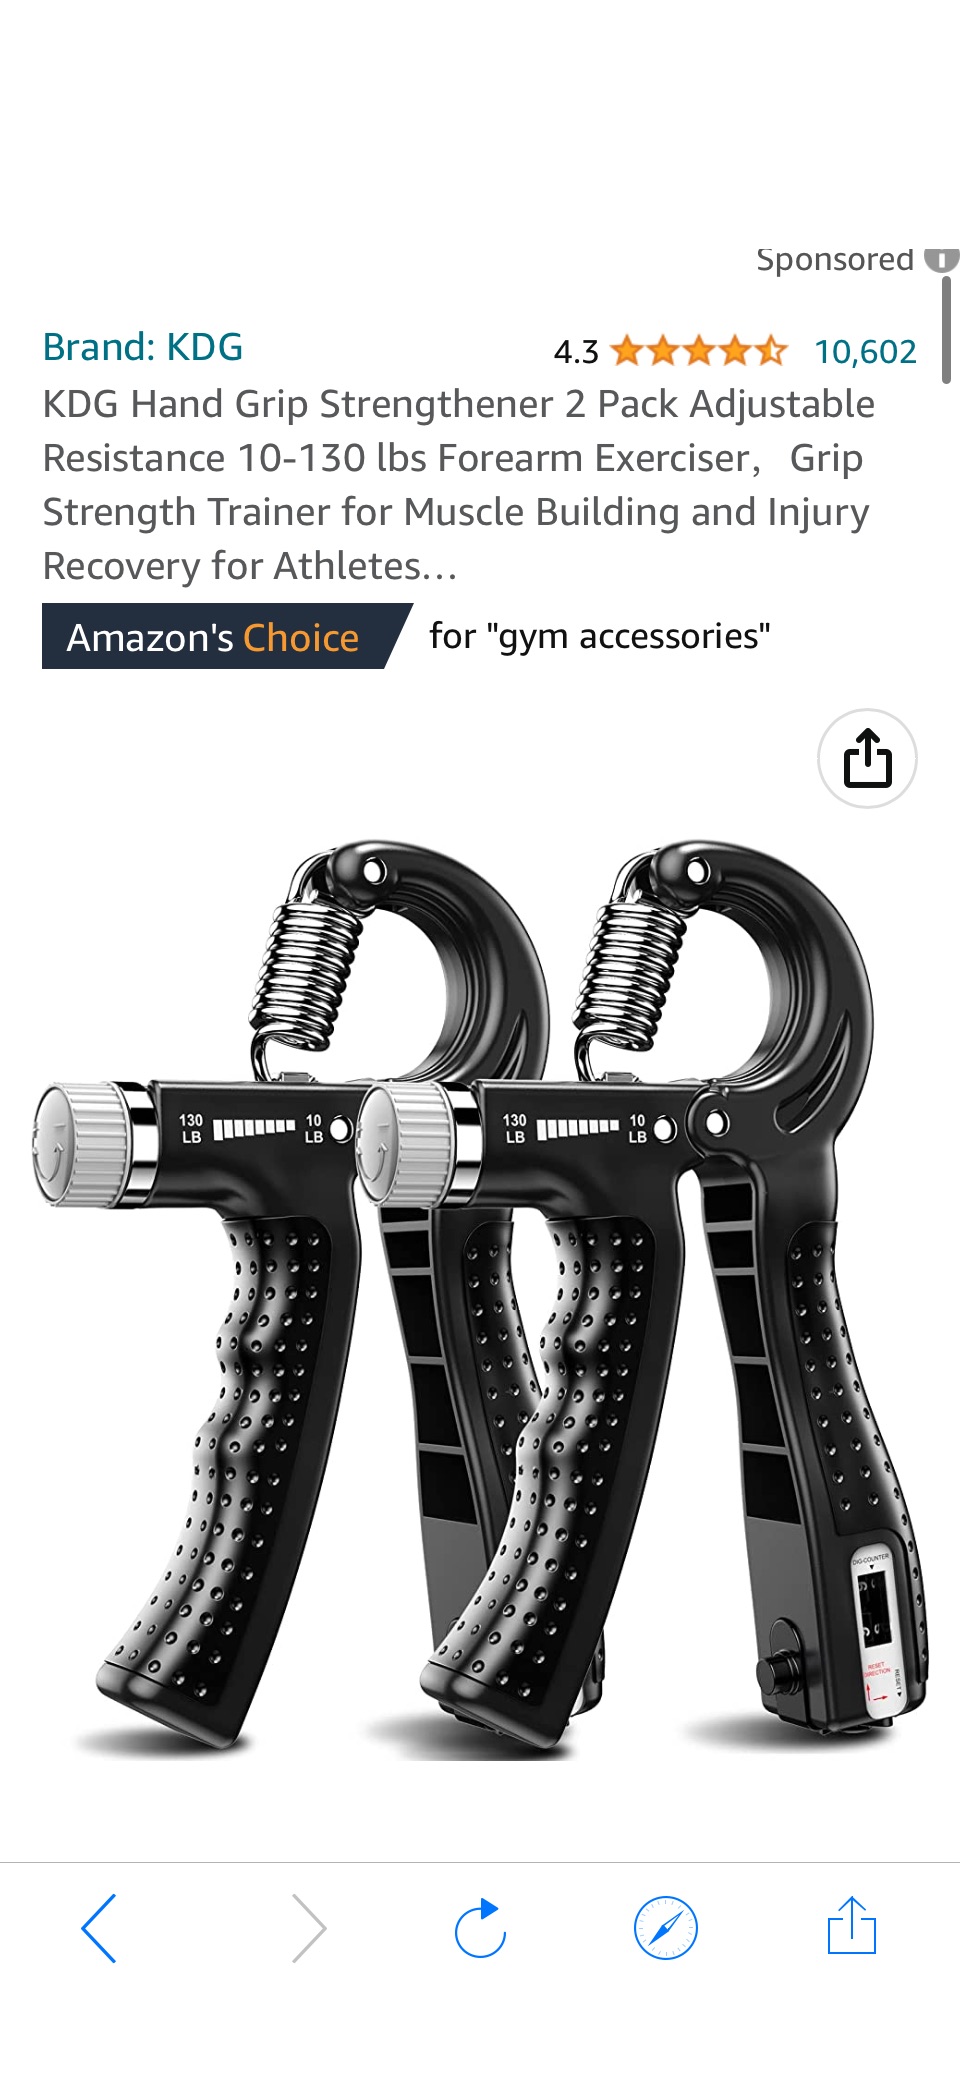 Amazon.com : KDG Hand Grip Strengthener 2 Pack(Black) Adjustable Resistance 10-130 lbs Forearm Exerciser，Grip Strength Trainer for Muscle Building and Injury Recovery原价23.99